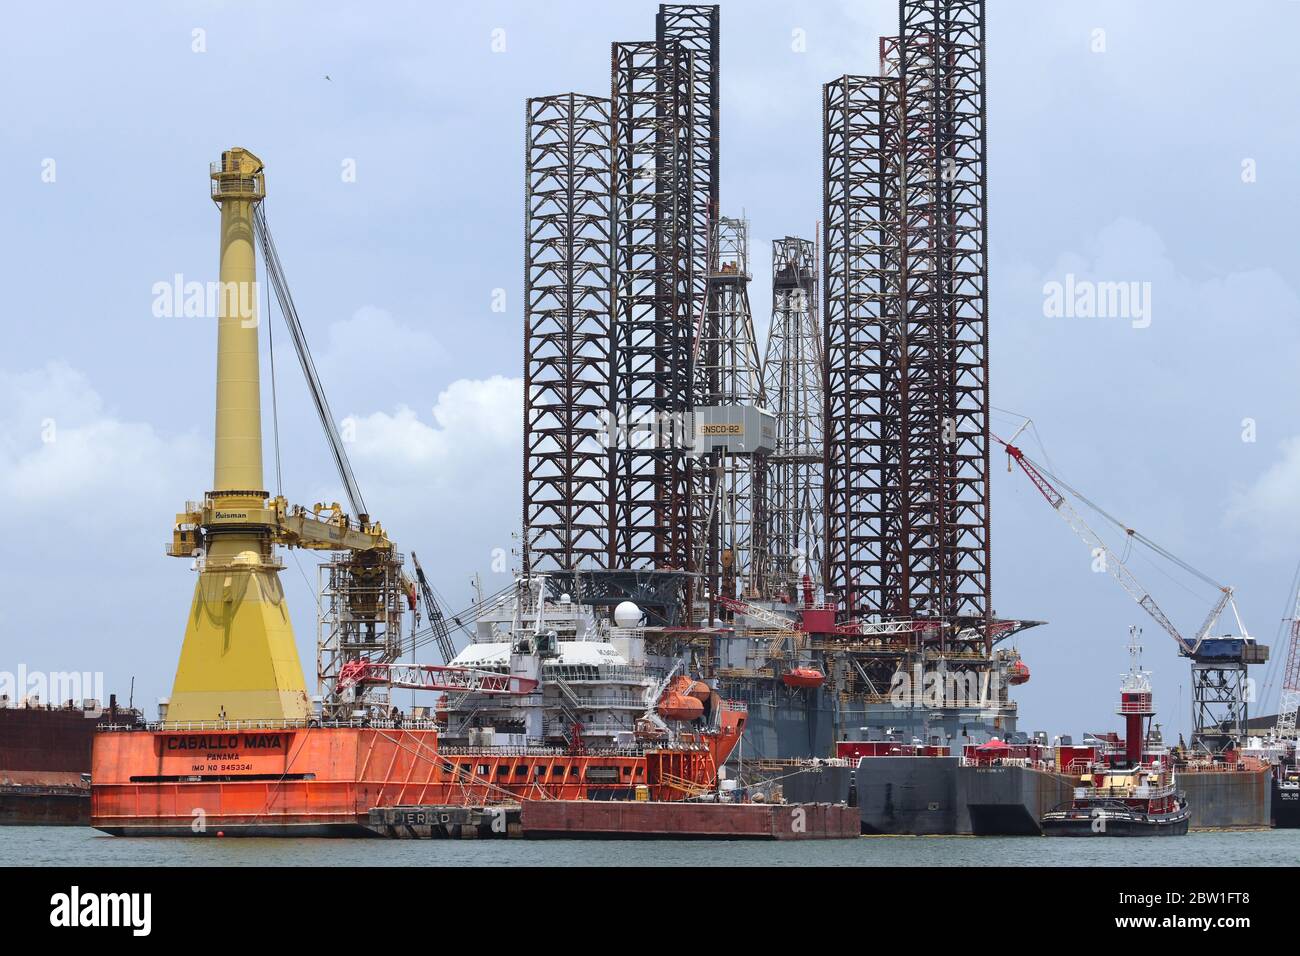 Docked oil platform, offshore drilling rig, in Port of Galveston, Texas, USA. The oil rig is getting rehabbed in the Texan harbor on the Gulf Coast. Stock Photo